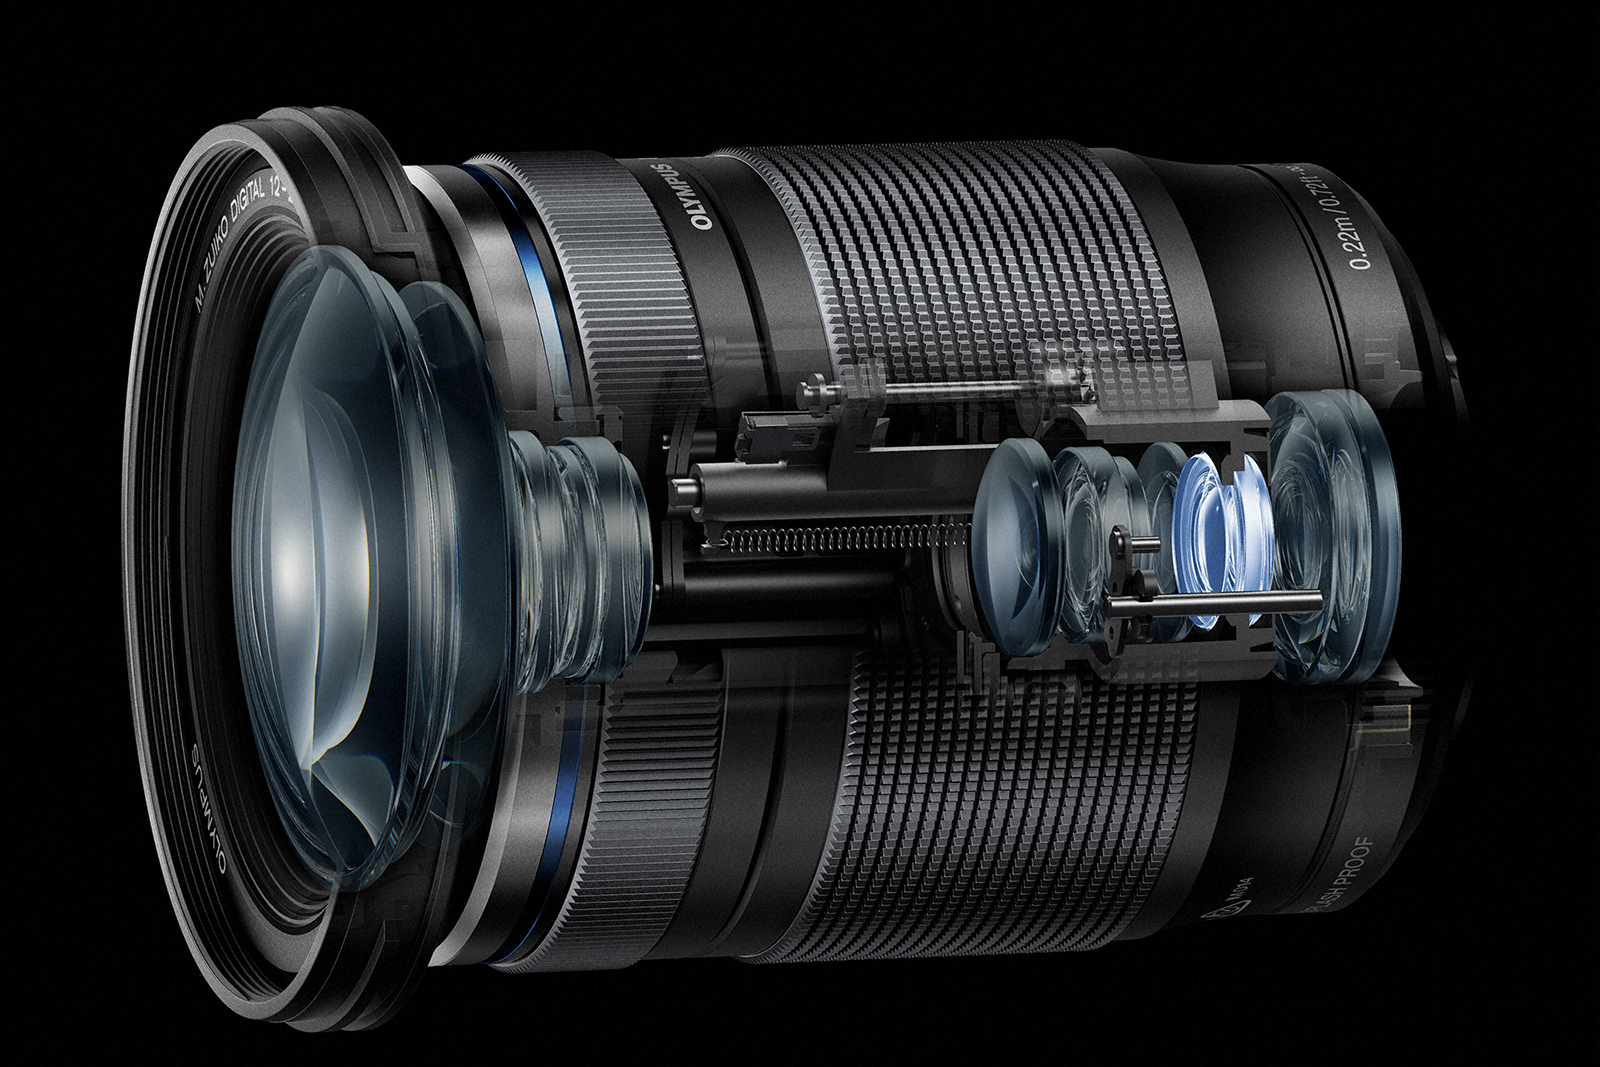 The Olympus 12-200mm Pro Lens has the Widest Zoom Range Yet